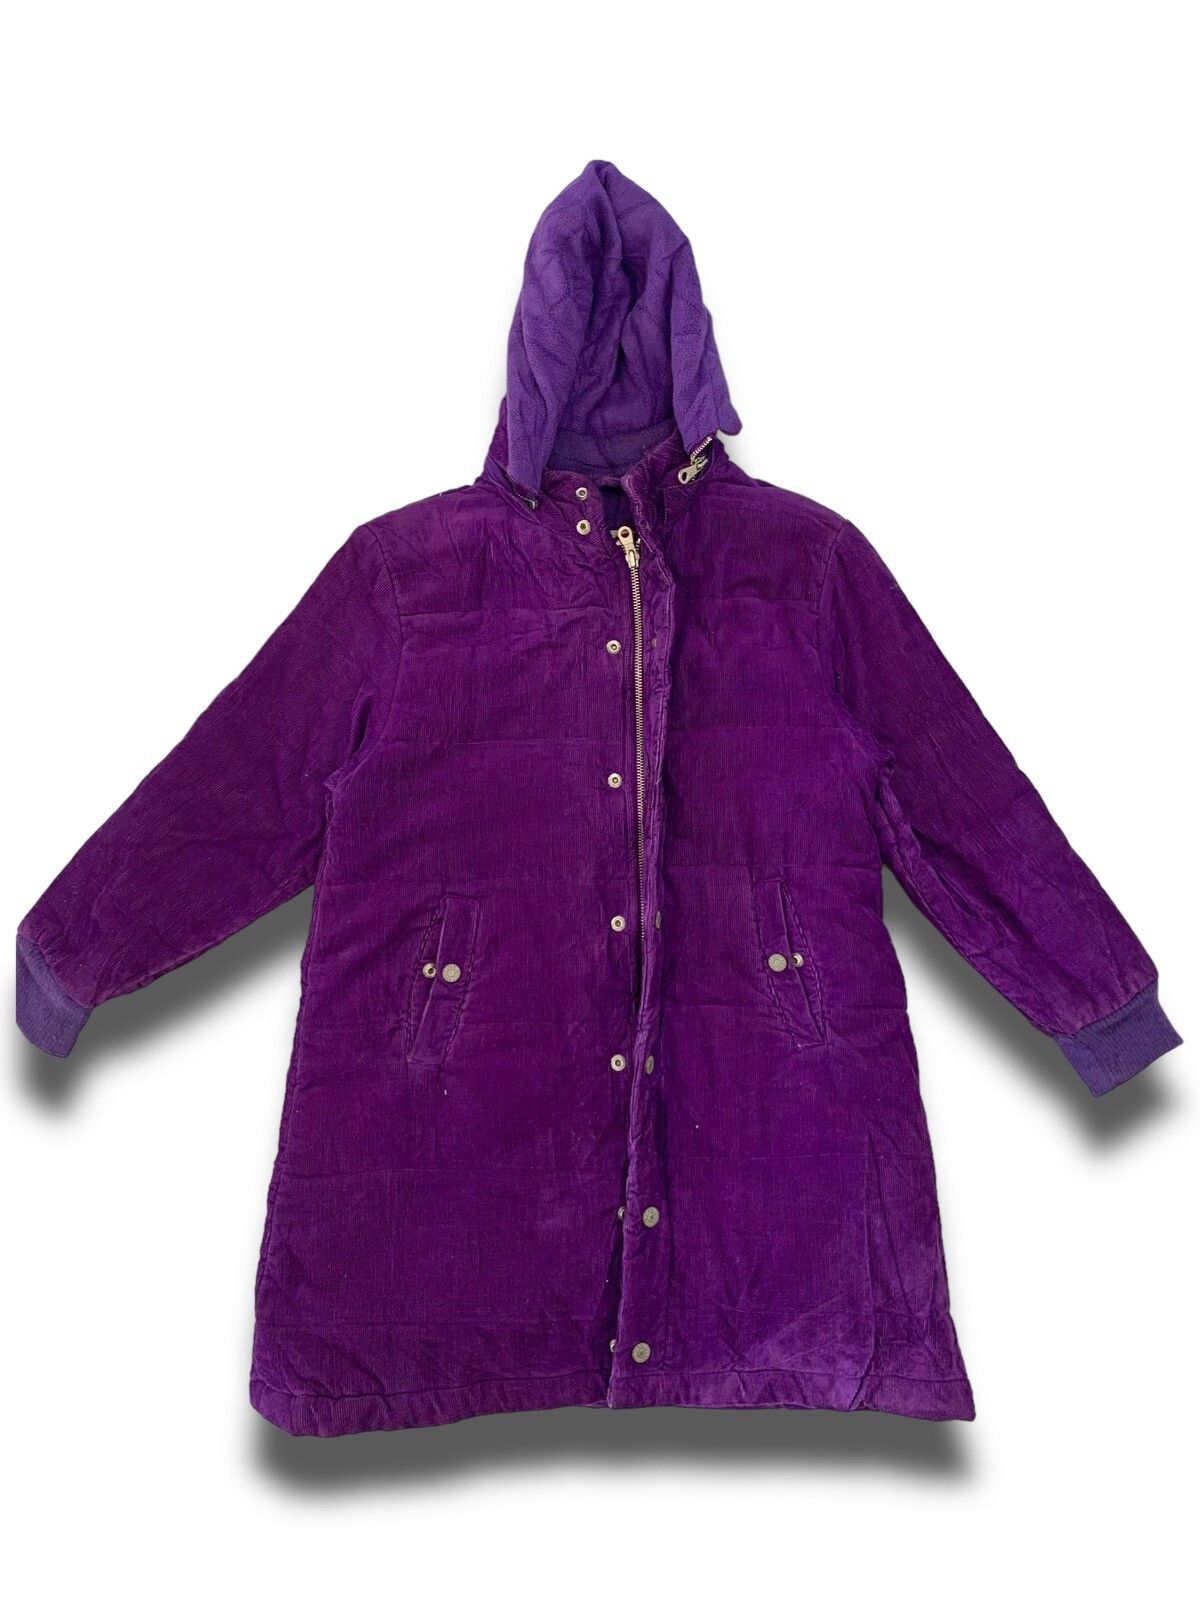 Archival Clothing Archival The Children’s Place Japanese Jacket Size L / US 10 / IT 46 - 6 Thumbnail